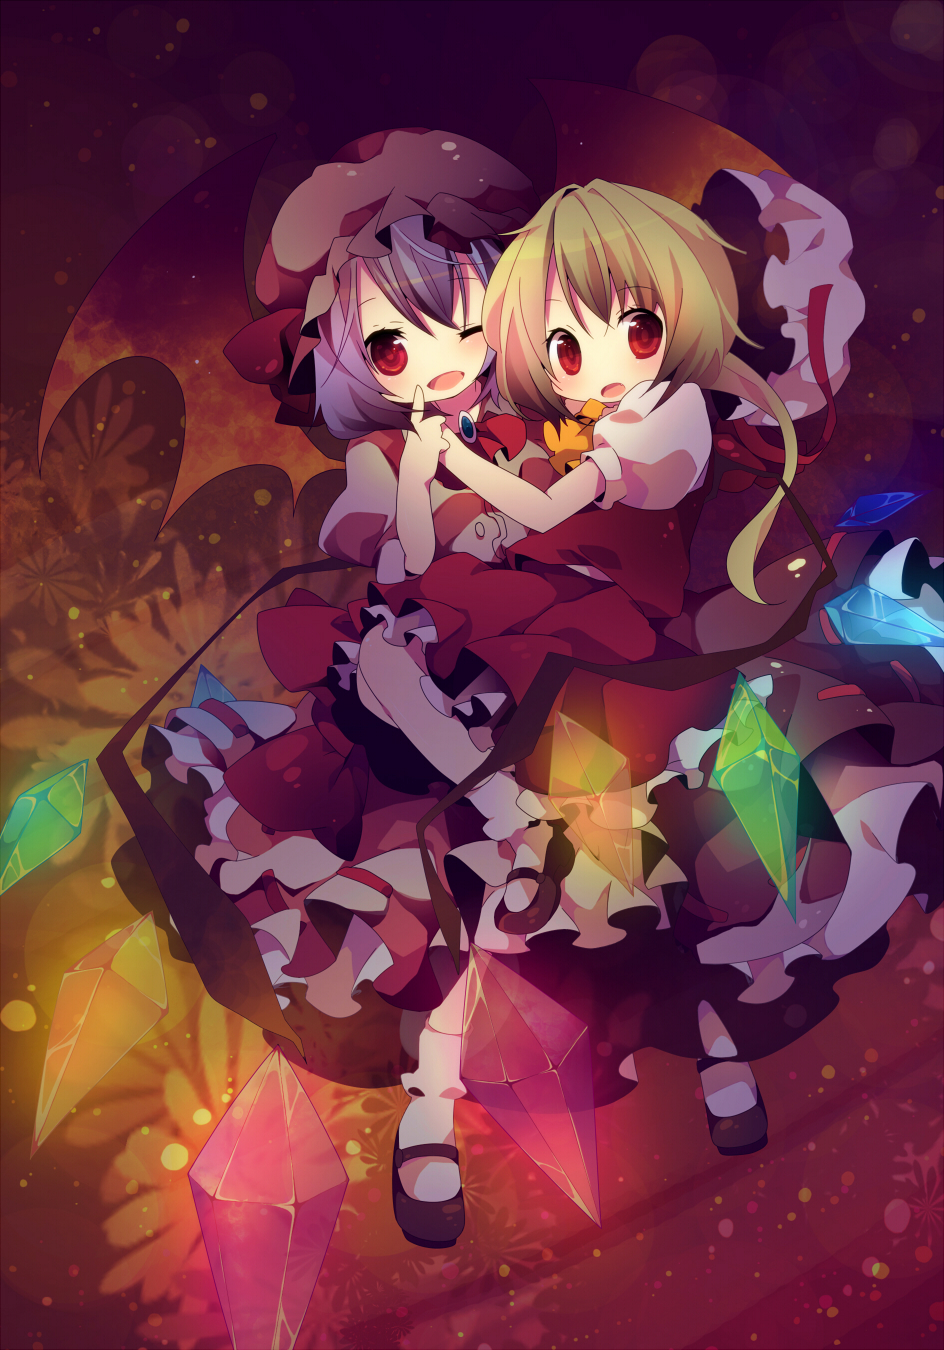 2girls ana_(rznuscrf) bat_wings blonde_hair bobby_socks carrying flandre_scarlet glowing hat hat_removed headwear_removed highres hug mary_janes multiple_girls open_mouth purple_hair red_eyes remilia_scarlet shoes siblings sisters smile socks touhou transparent wings wink